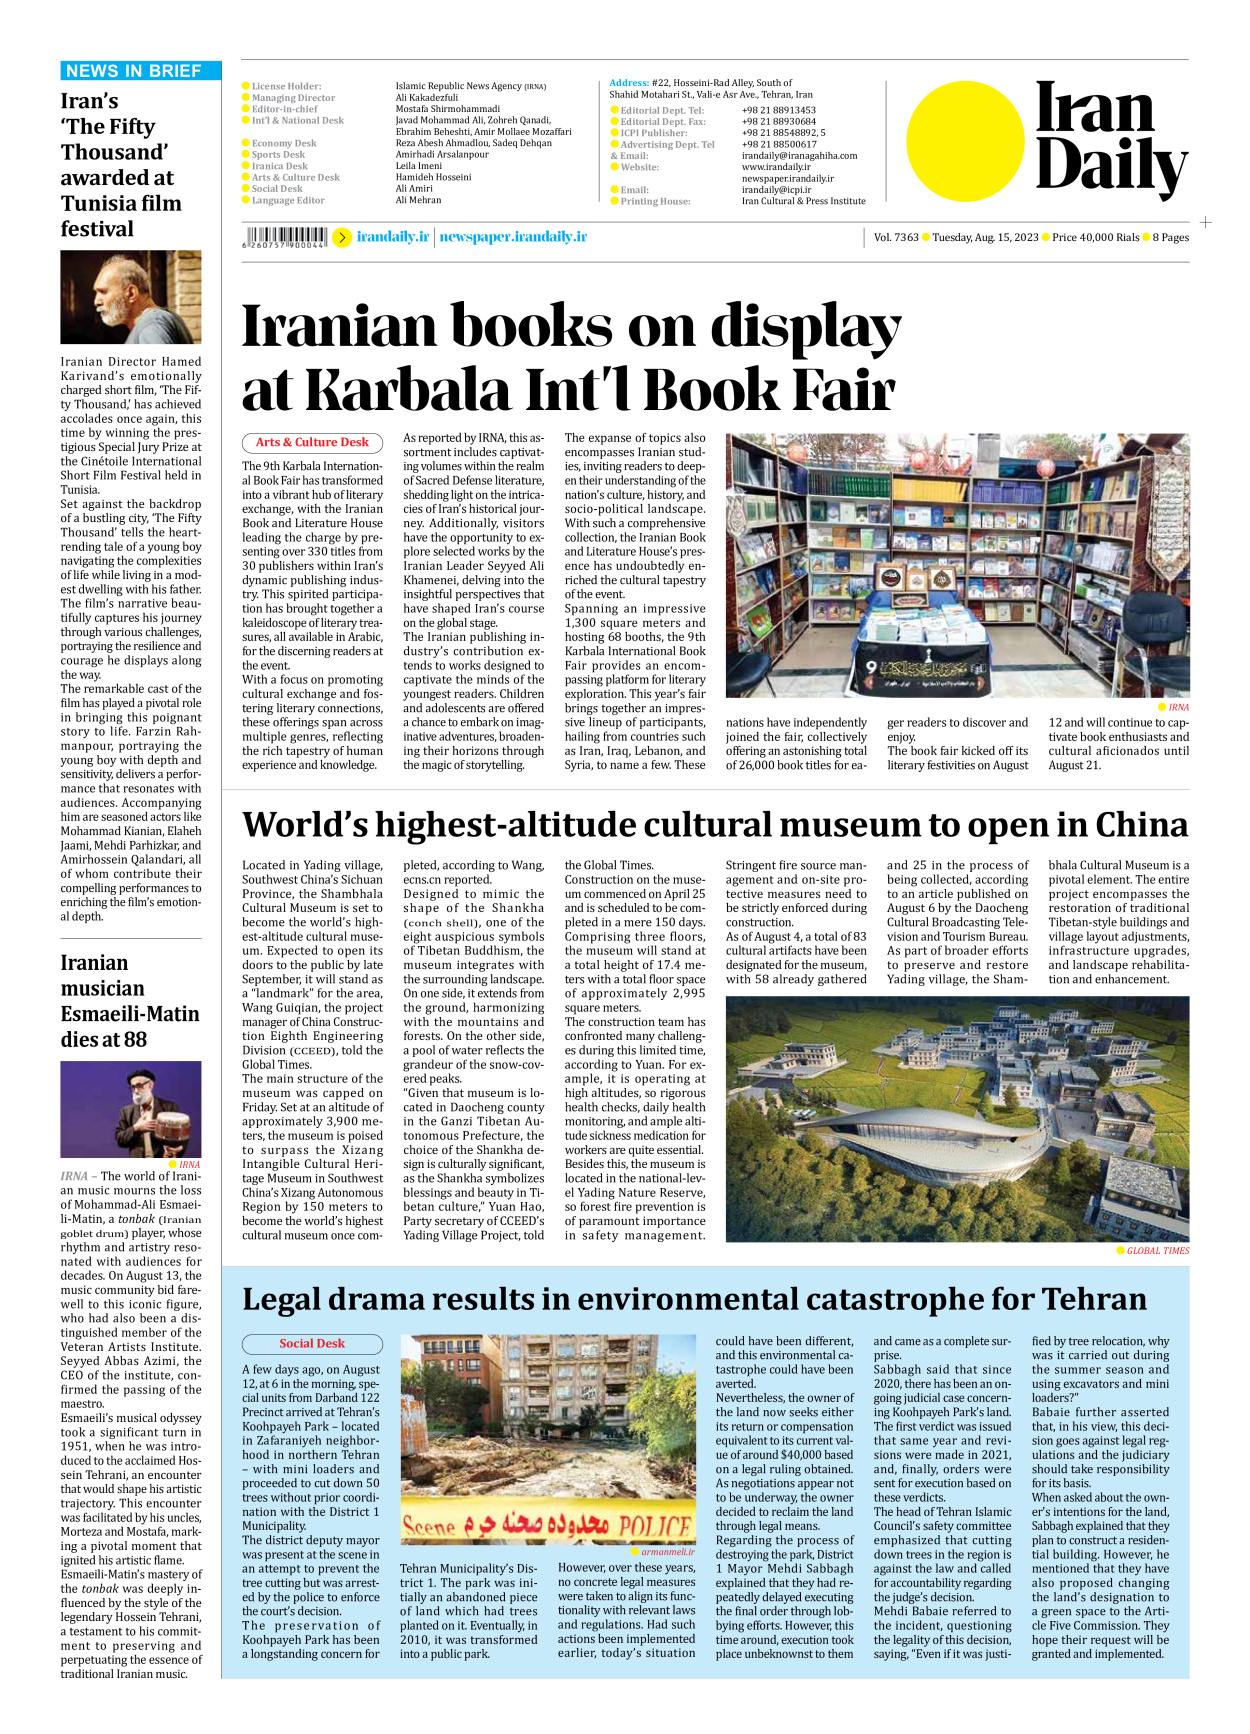 Iran Daily - Number Seven Thousand Three Hundred and Sixty Three - 15 August 2023 - Page 8